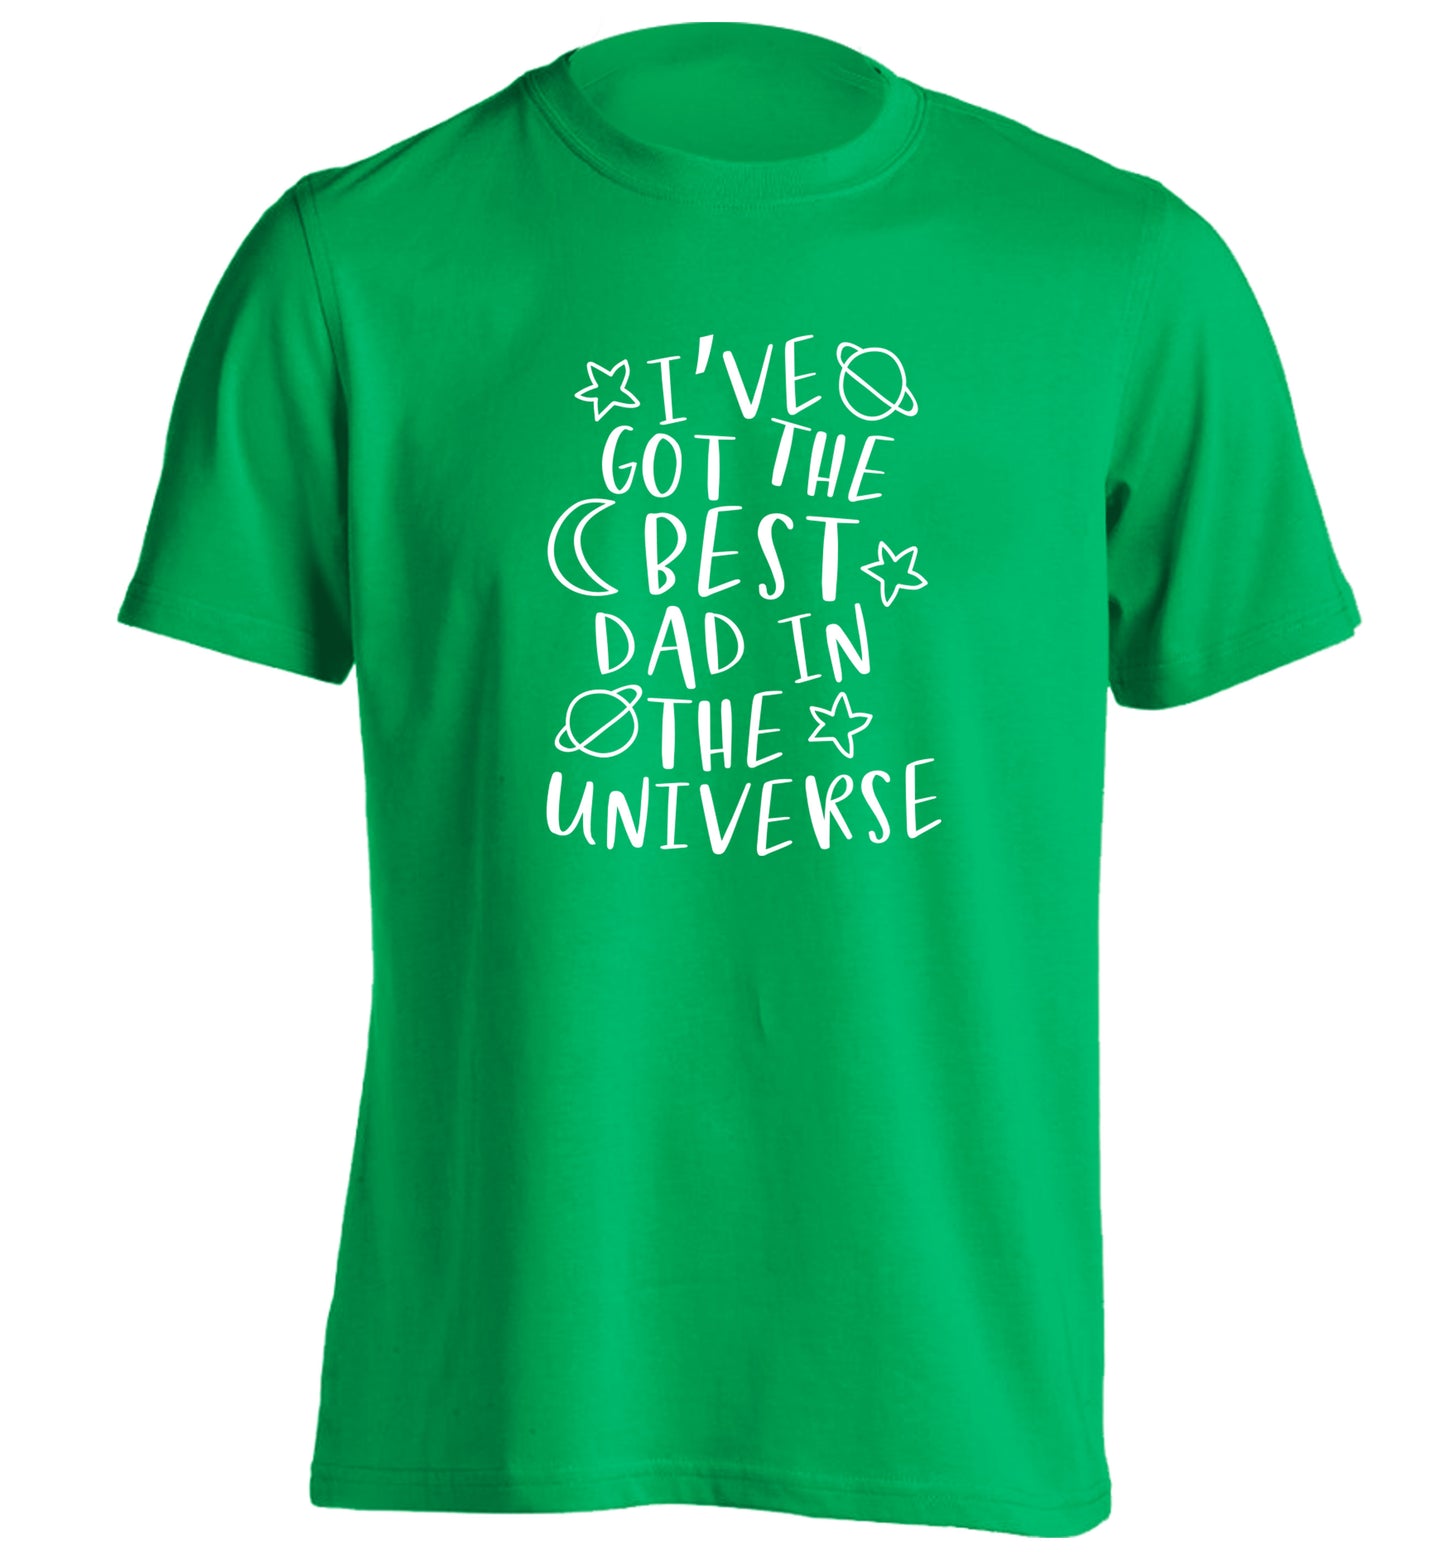 I've got the best dad in the universe adults unisex green Tshirt 2XL